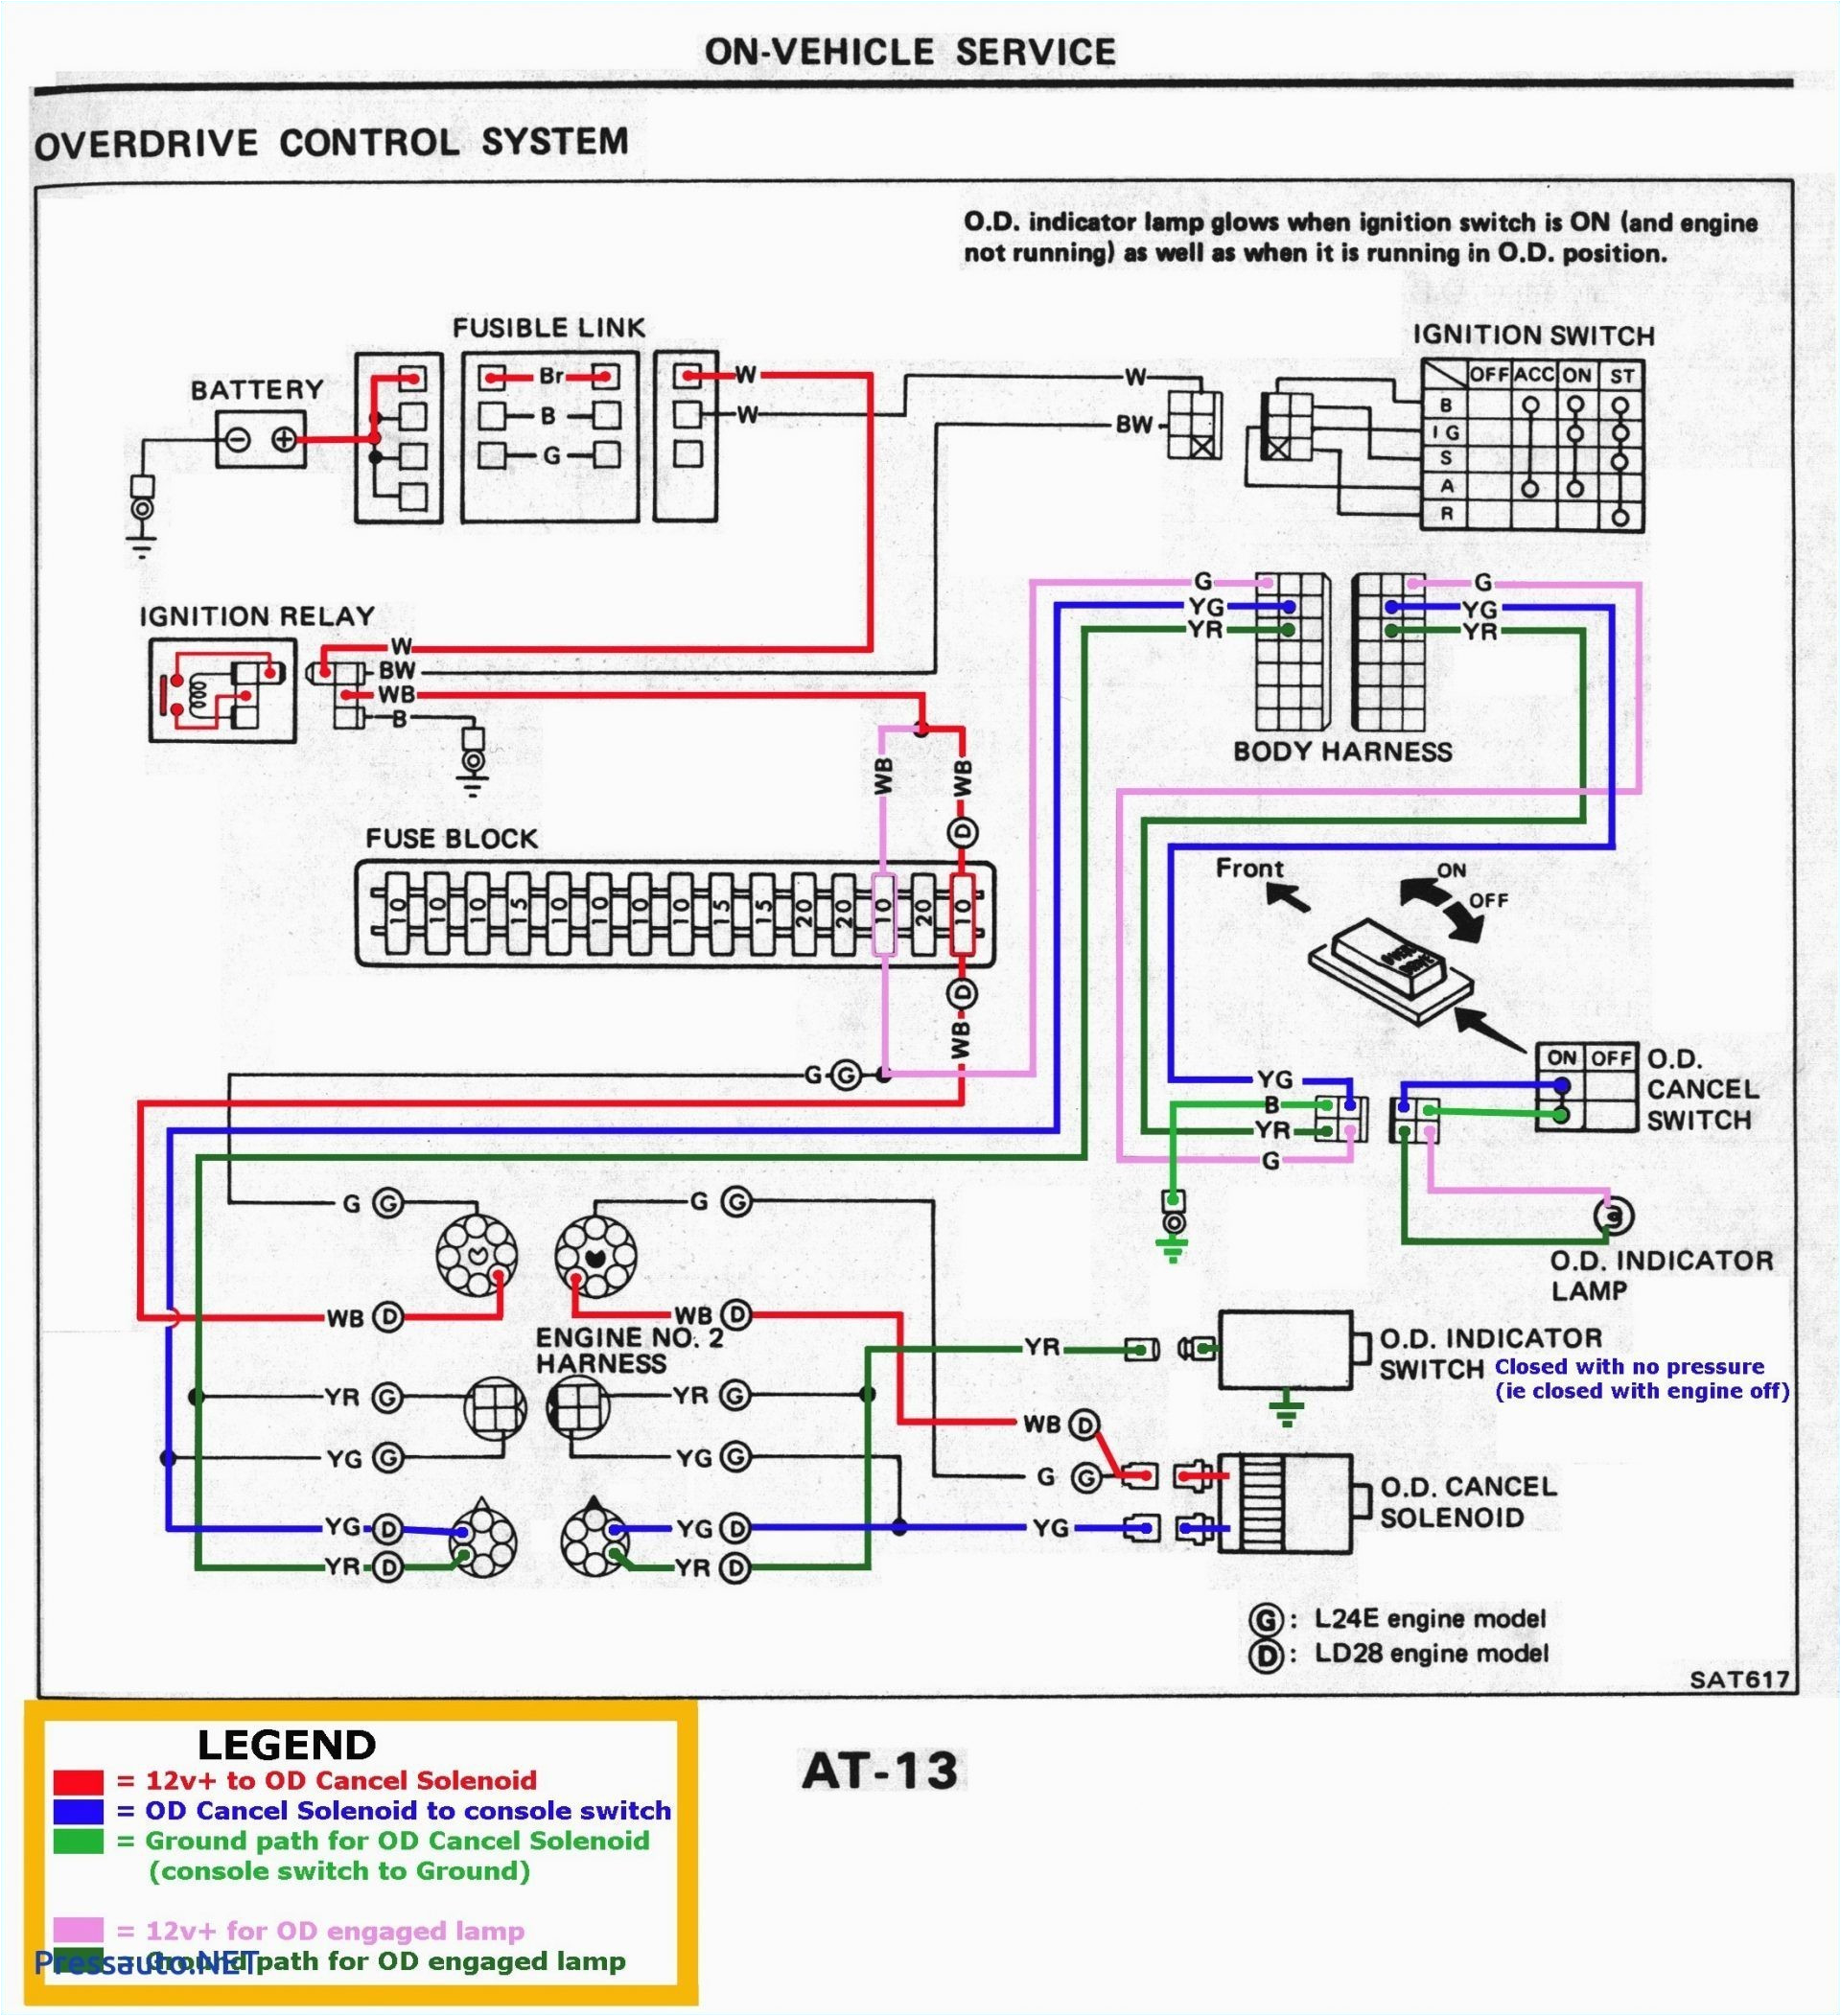 wiring diagrams model 360rd code3 data schematic diagram code 3 wiring diagram model 360rd wiring diagram